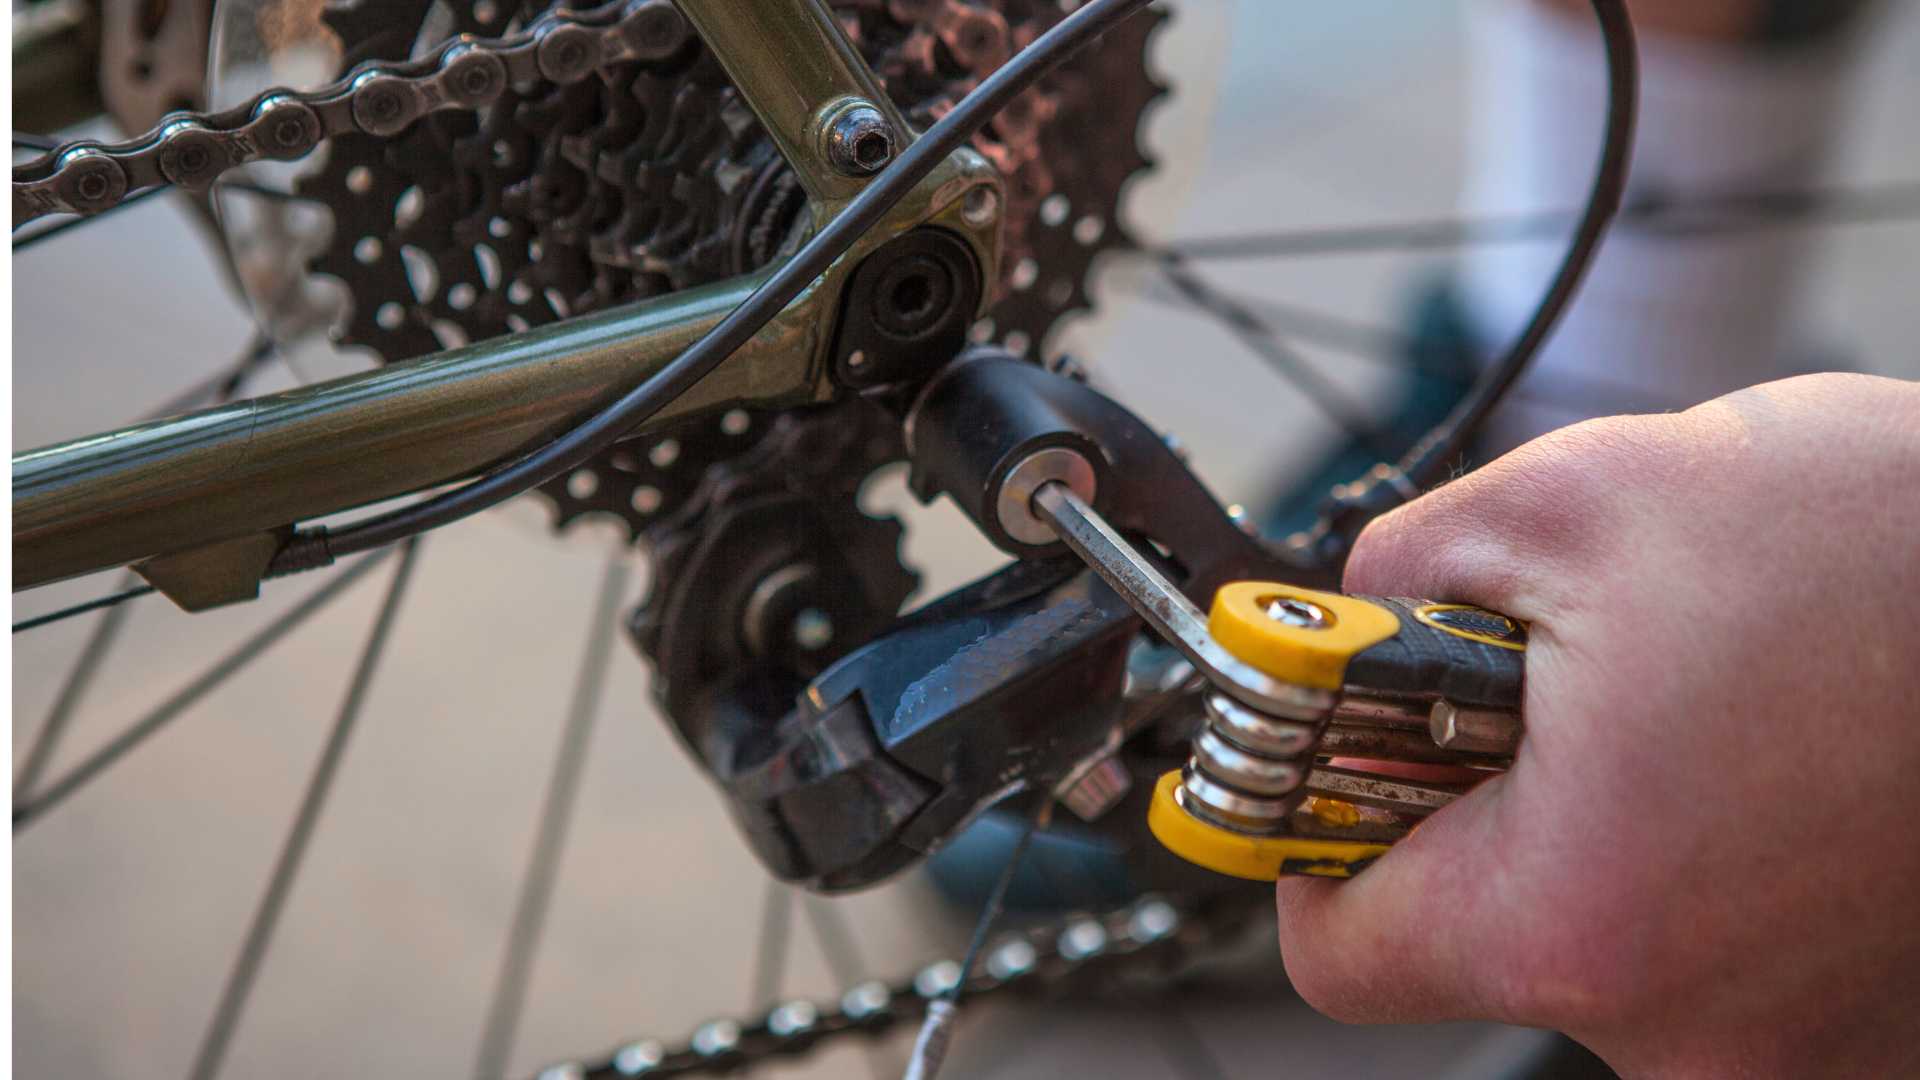 The Ultimate Bike Multi-Tool Guide: Everything You Need to Know